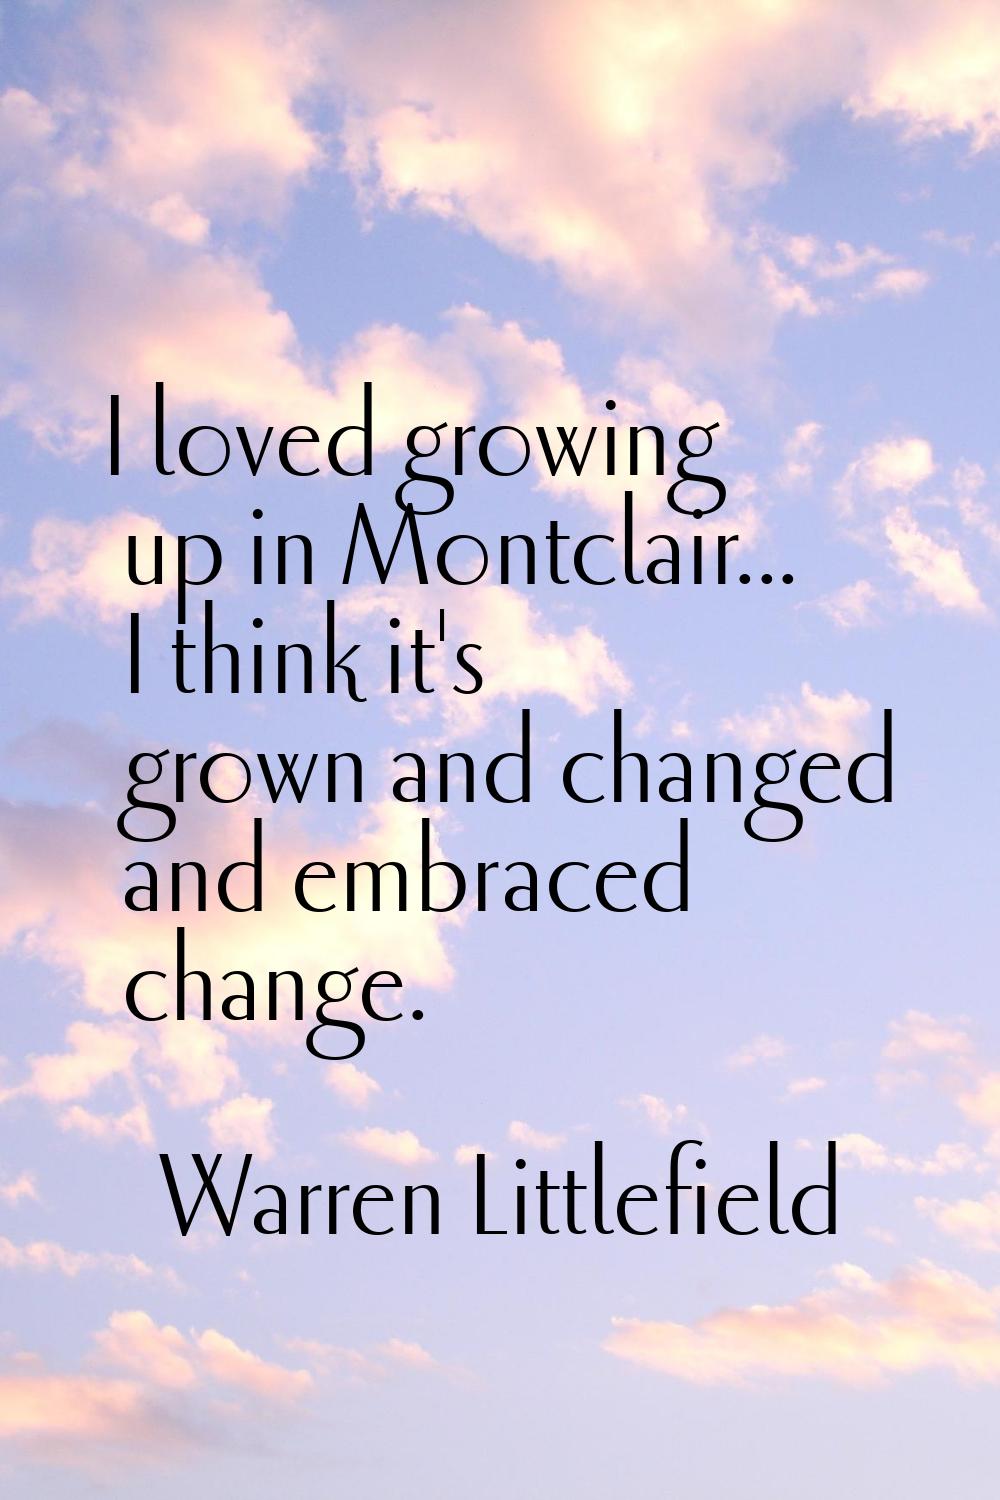 I loved growing up in Montclair... I think it's grown and changed and embraced change.